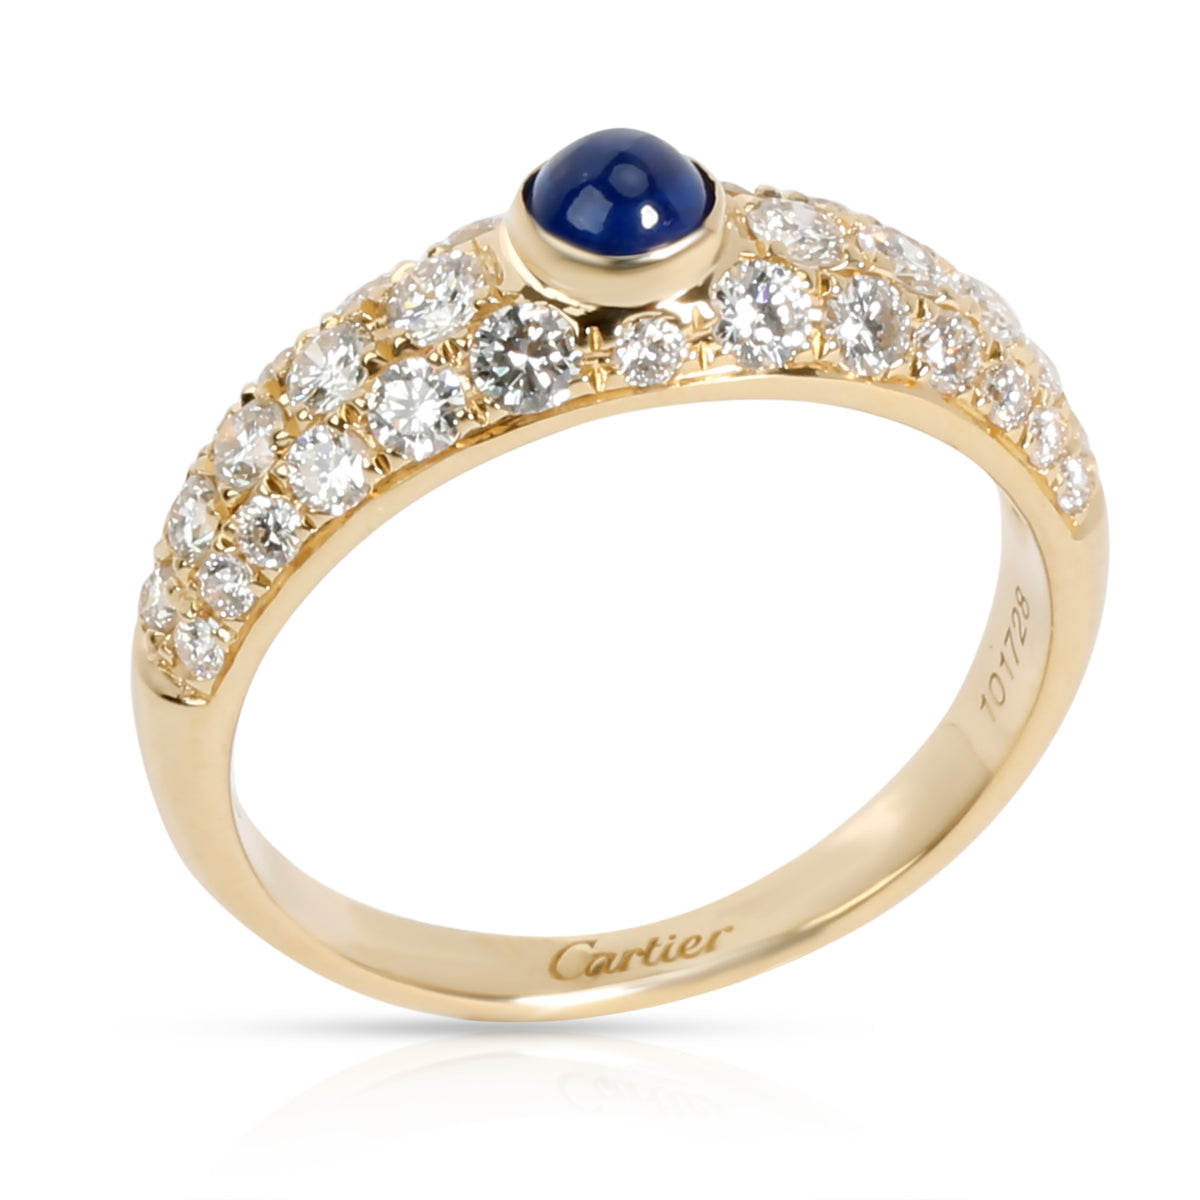 Cartier Cabochon Sapphire & Pave Diamond Ring in 18K Yellow Gold 1.22 ctw